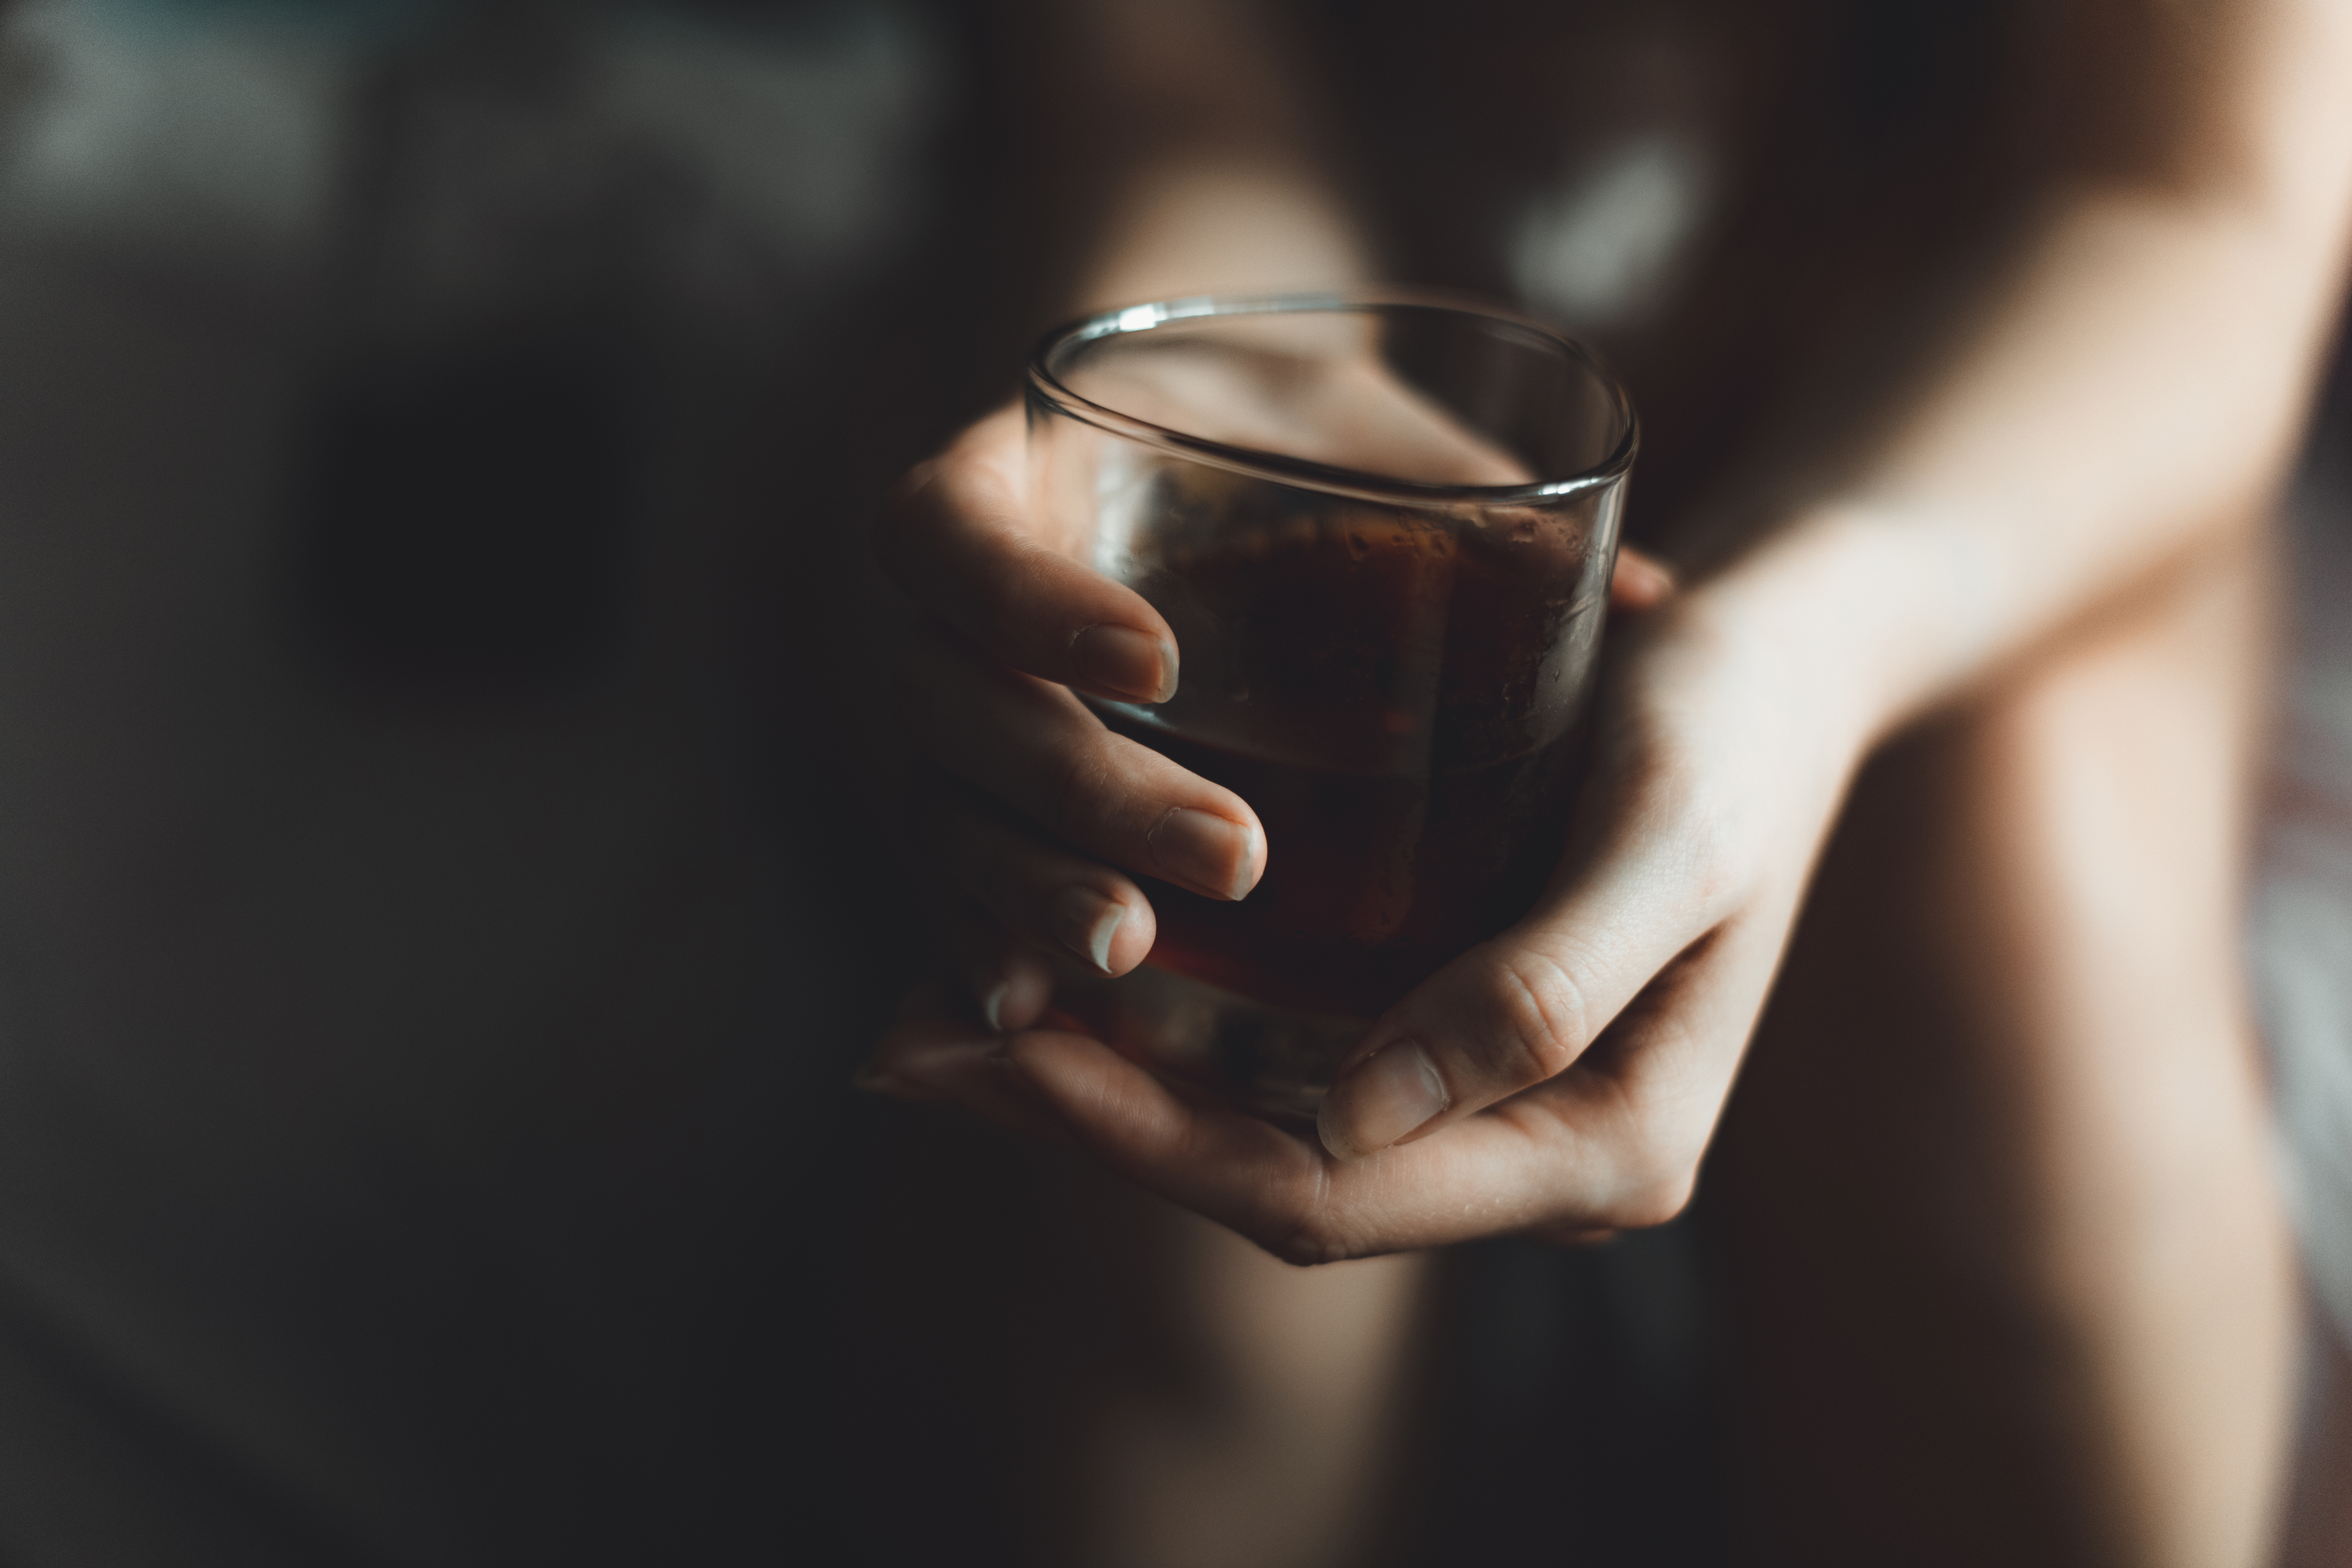 Does Alcohol Affect Men and Women the Same Way?